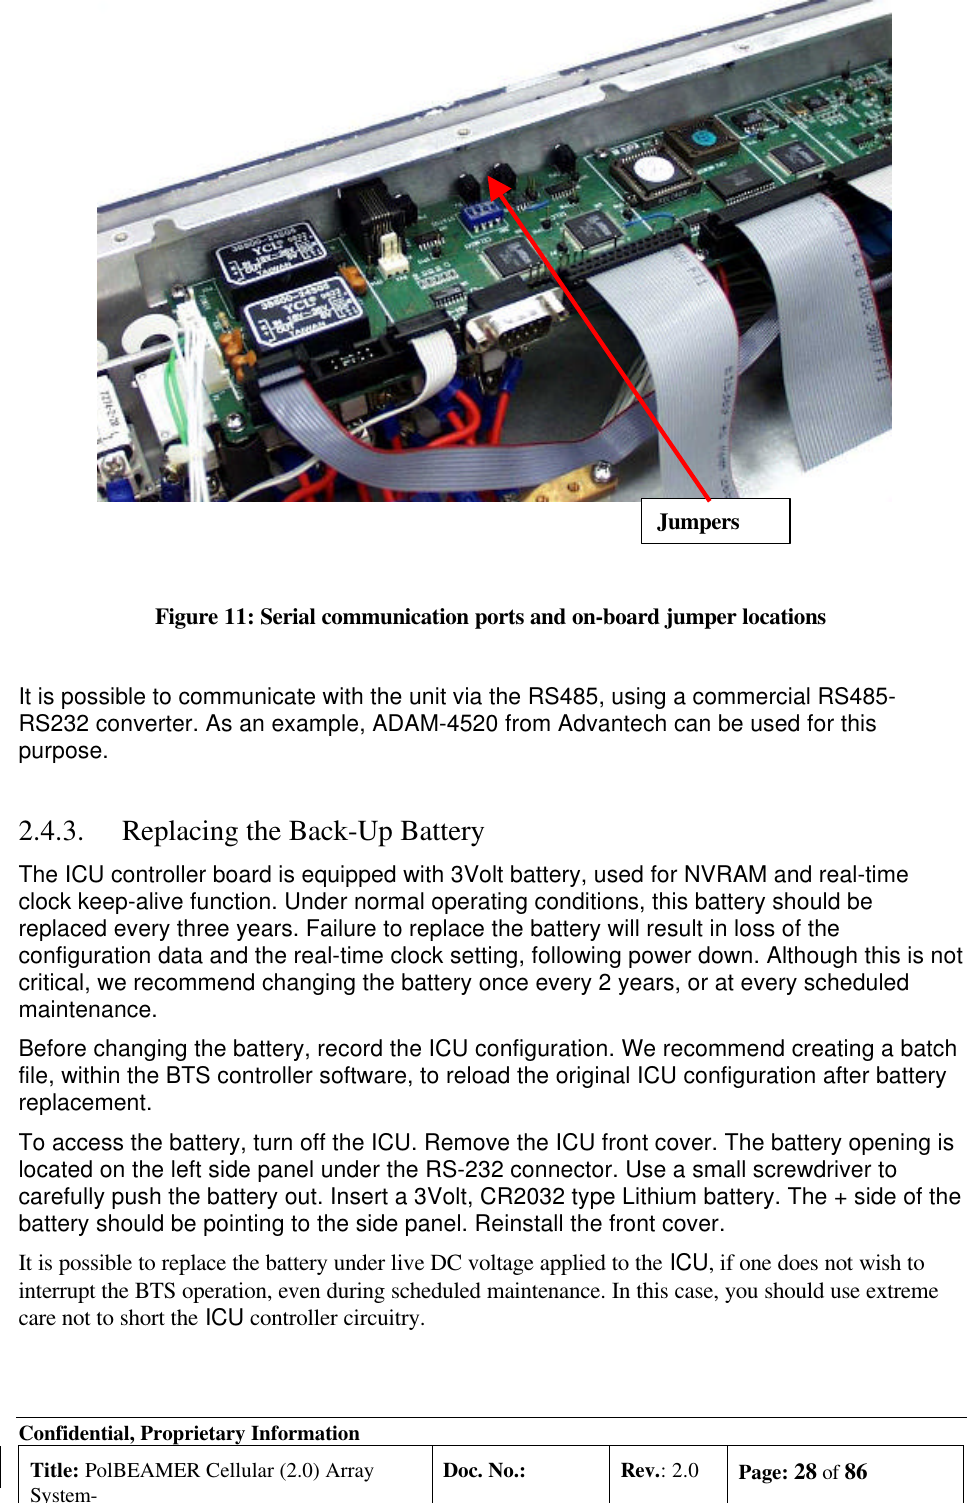 Confidential, Proprietary InformationTitle: PolBEAMER Cellular (2.0) ArraySystem-Doc. No.: Rev.: 2.0 Page: 28 of 86Figure 11: Serial communication ports and on-board jumper locationsIt is possible to communicate with the unit via the RS485, using a commercial RS485-RS232 converter. As an example, ADAM-4520 from Advantech can be used for thispurpose.2.4.3. Replacing the Back-Up BatteryThe ICU controller board is equipped with 3Volt battery, used for NVRAM and real-timeclock keep-alive function. Under normal operating conditions, this battery should bereplaced every three years. Failure to replace the battery will result in loss of theconfiguration data and the real-time clock setting, following power down. Although this is notcritical, we recommend changing the battery once every 2 years, or at every scheduledmaintenance.Before changing the battery, record the ICU configuration. We recommend creating a batchfile, within the BTS controller software, to reload the original ICU configuration after batteryreplacement.To access the battery, turn off the ICU. Remove the ICU front cover. The battery opening islocated on the left side panel under the RS-232 connector. Use a small screwdriver tocarefully push the battery out. Insert a 3Volt, CR2032 type Lithium battery. The + side of thebattery should be pointing to the side panel. Reinstall the front cover.It is possible to replace the battery under live DC voltage applied to the ICU, if one does not wish tointerrupt the BTS operation, even during scheduled maintenance. In this case, you should use extremecare not to short the ICU controller circuitry.Jumpers